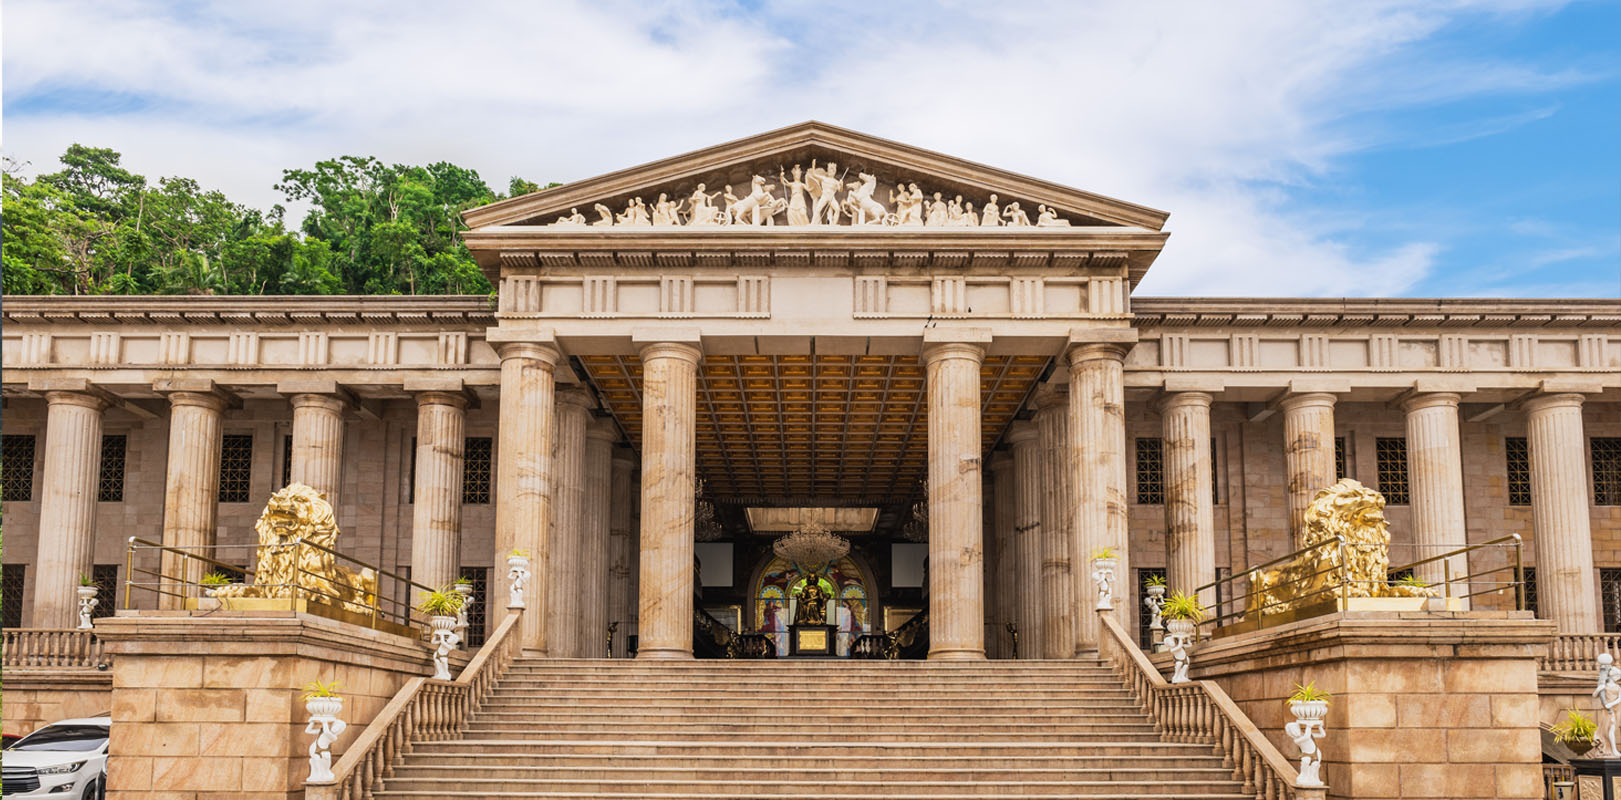 Best places to visit in Cebu - Temple of Leah